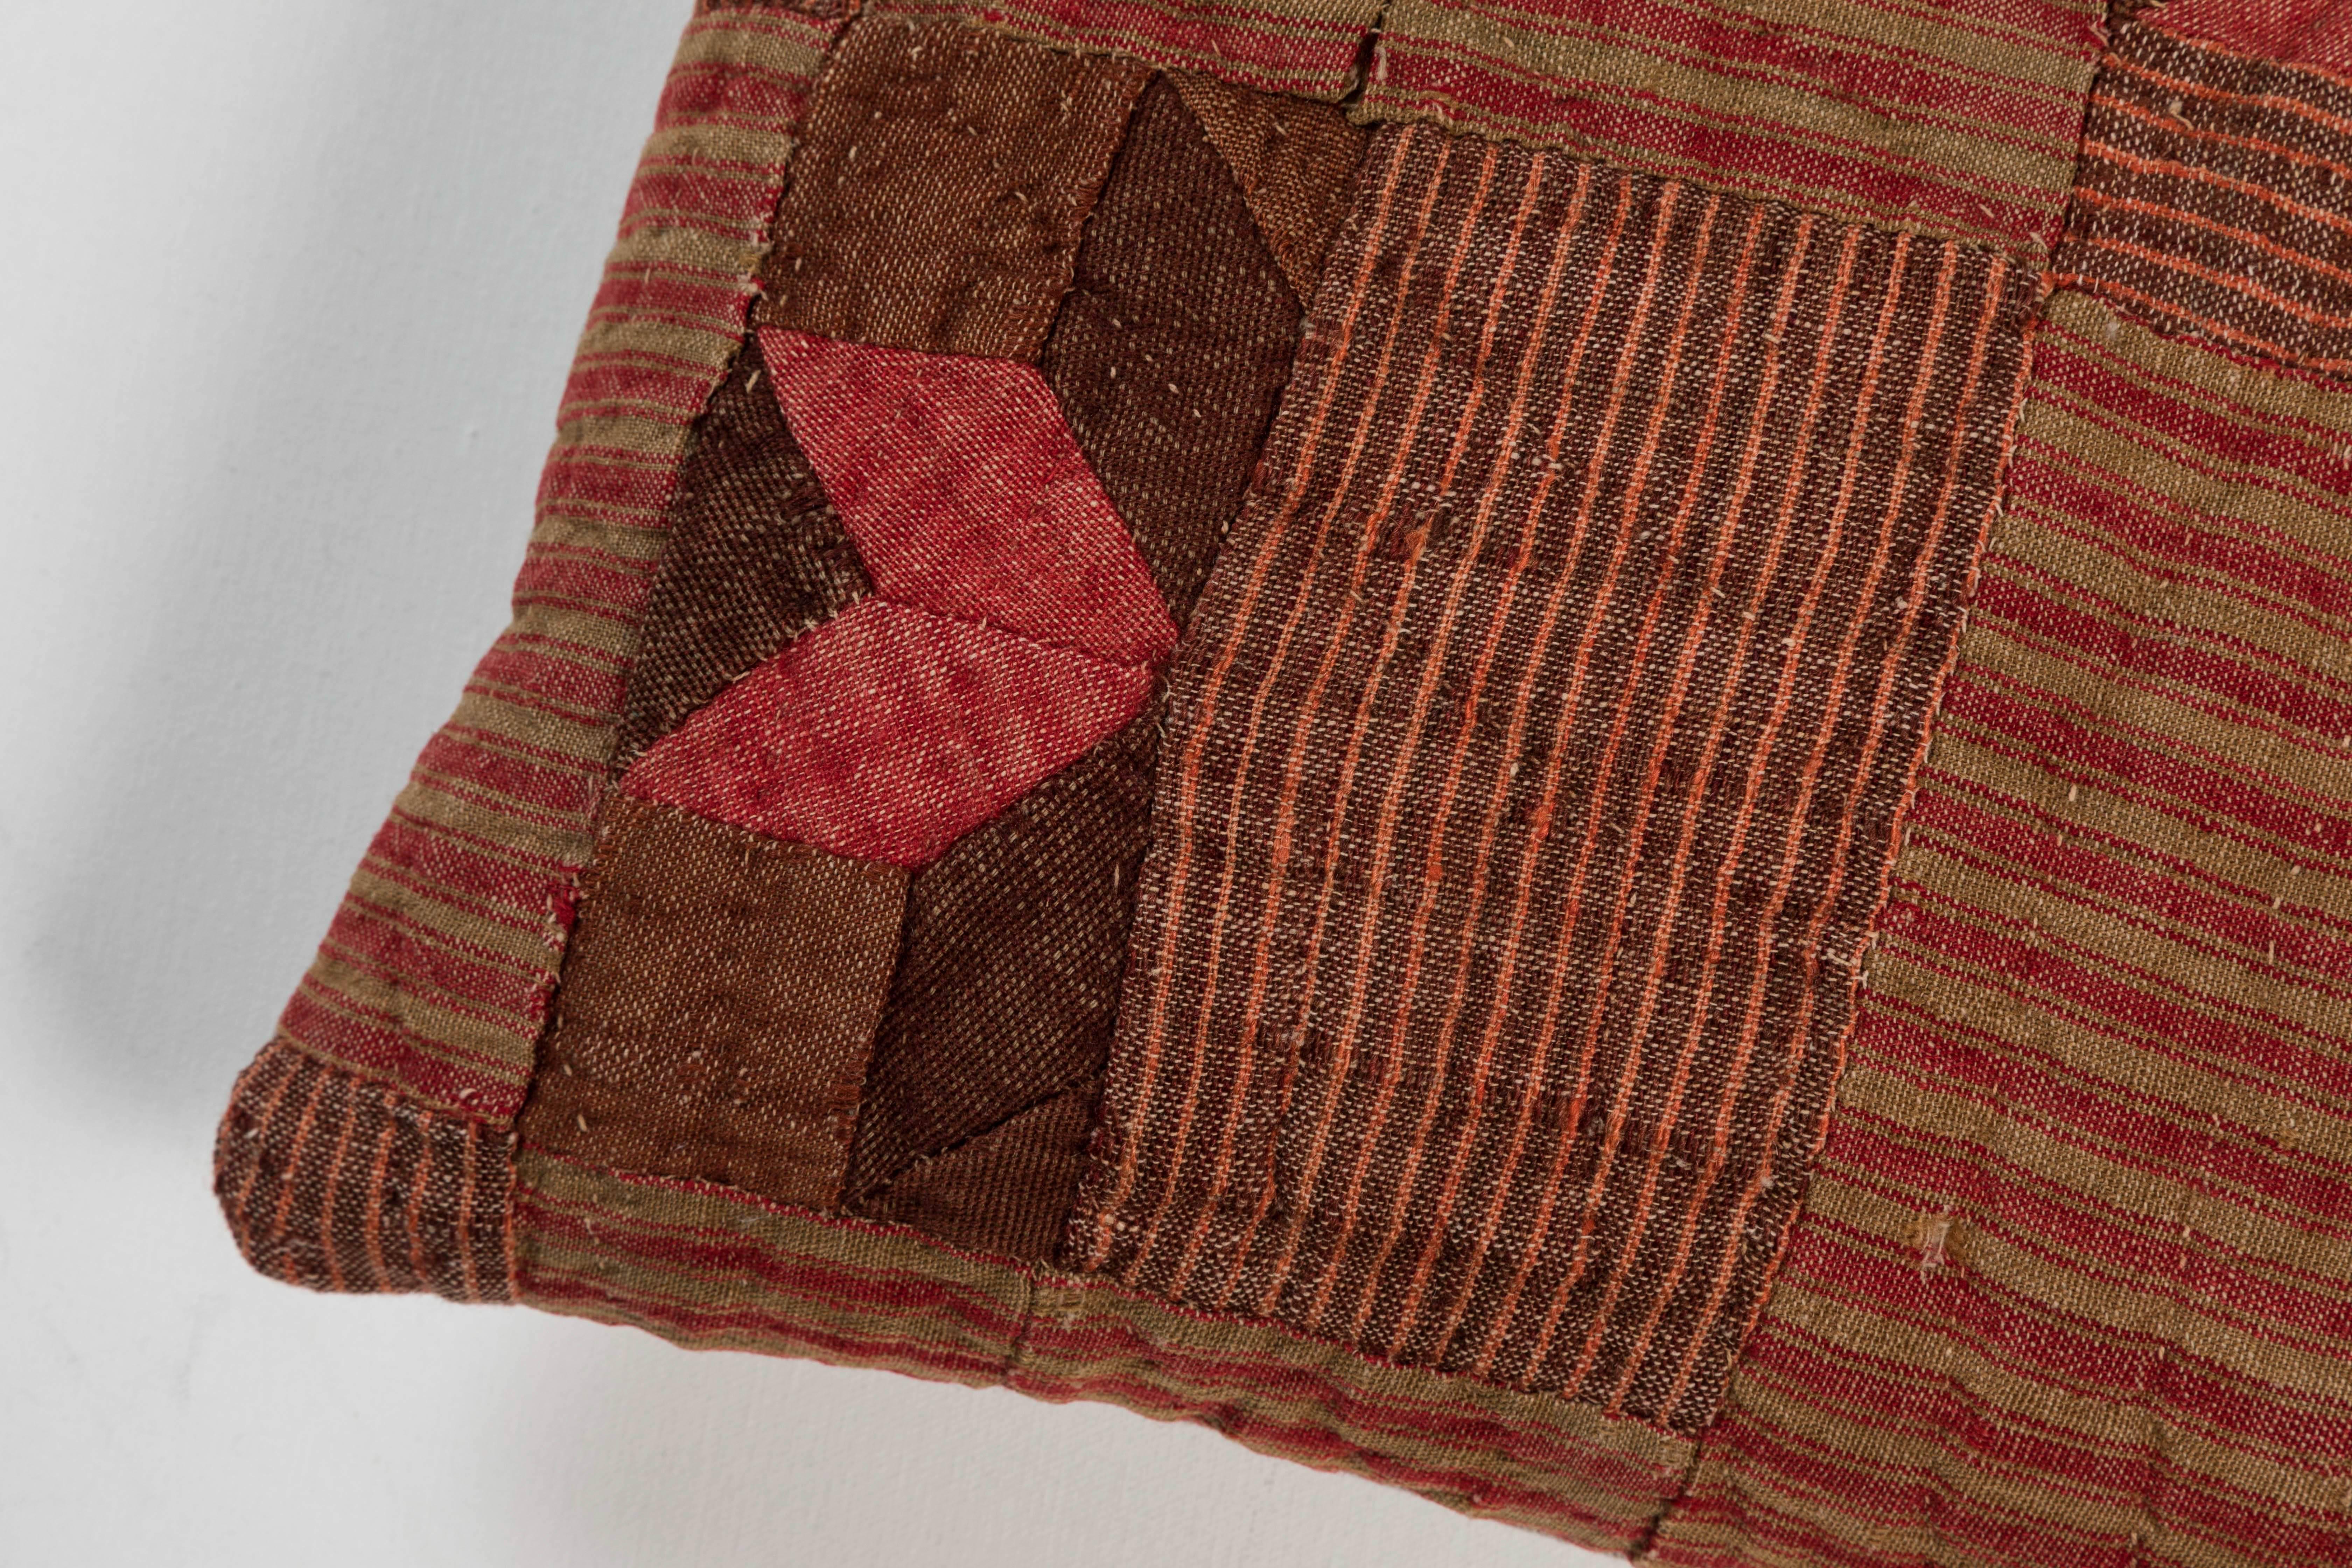 Patchwork of handwoven pieces of 19th century, French linen. Natural dye colors: rust red, olive green and brown. Natural color linen back, feather and down fill and invisible zipper.